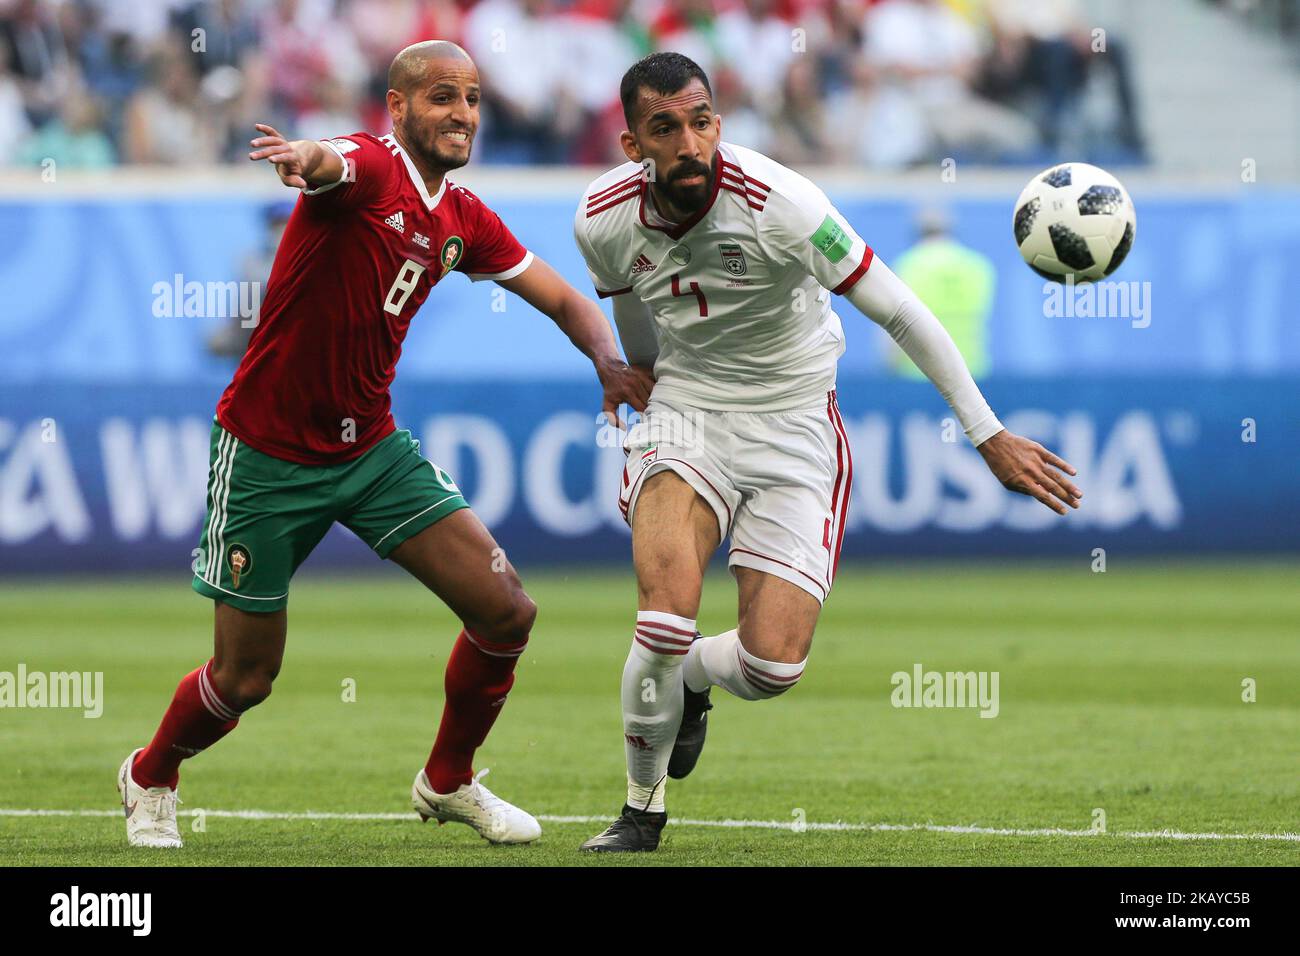 Karim El Ahmadi (L) of the Morocco national football team and Roozbeh Cheshmi of the Iran national football team vie for the ball during the 2018 FIFA World Cup match, first stage - Group B between Morocco and Iran at Saint Petersburg Stadium on June 15, 2018 in St. Petersburg, Russia. (Photo by Igor Russak/NurPhoto) Stock Photo